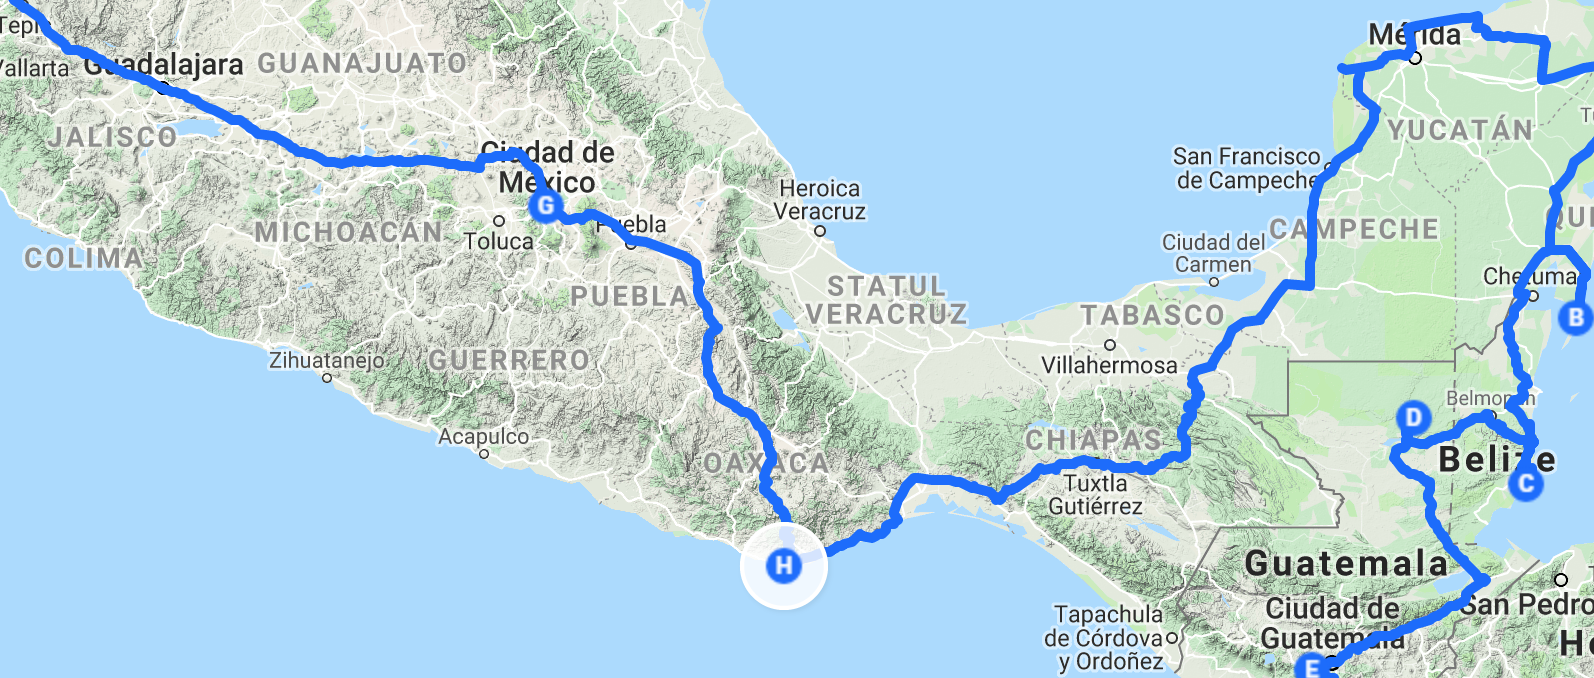 Our route in Chiapas, Mexico 